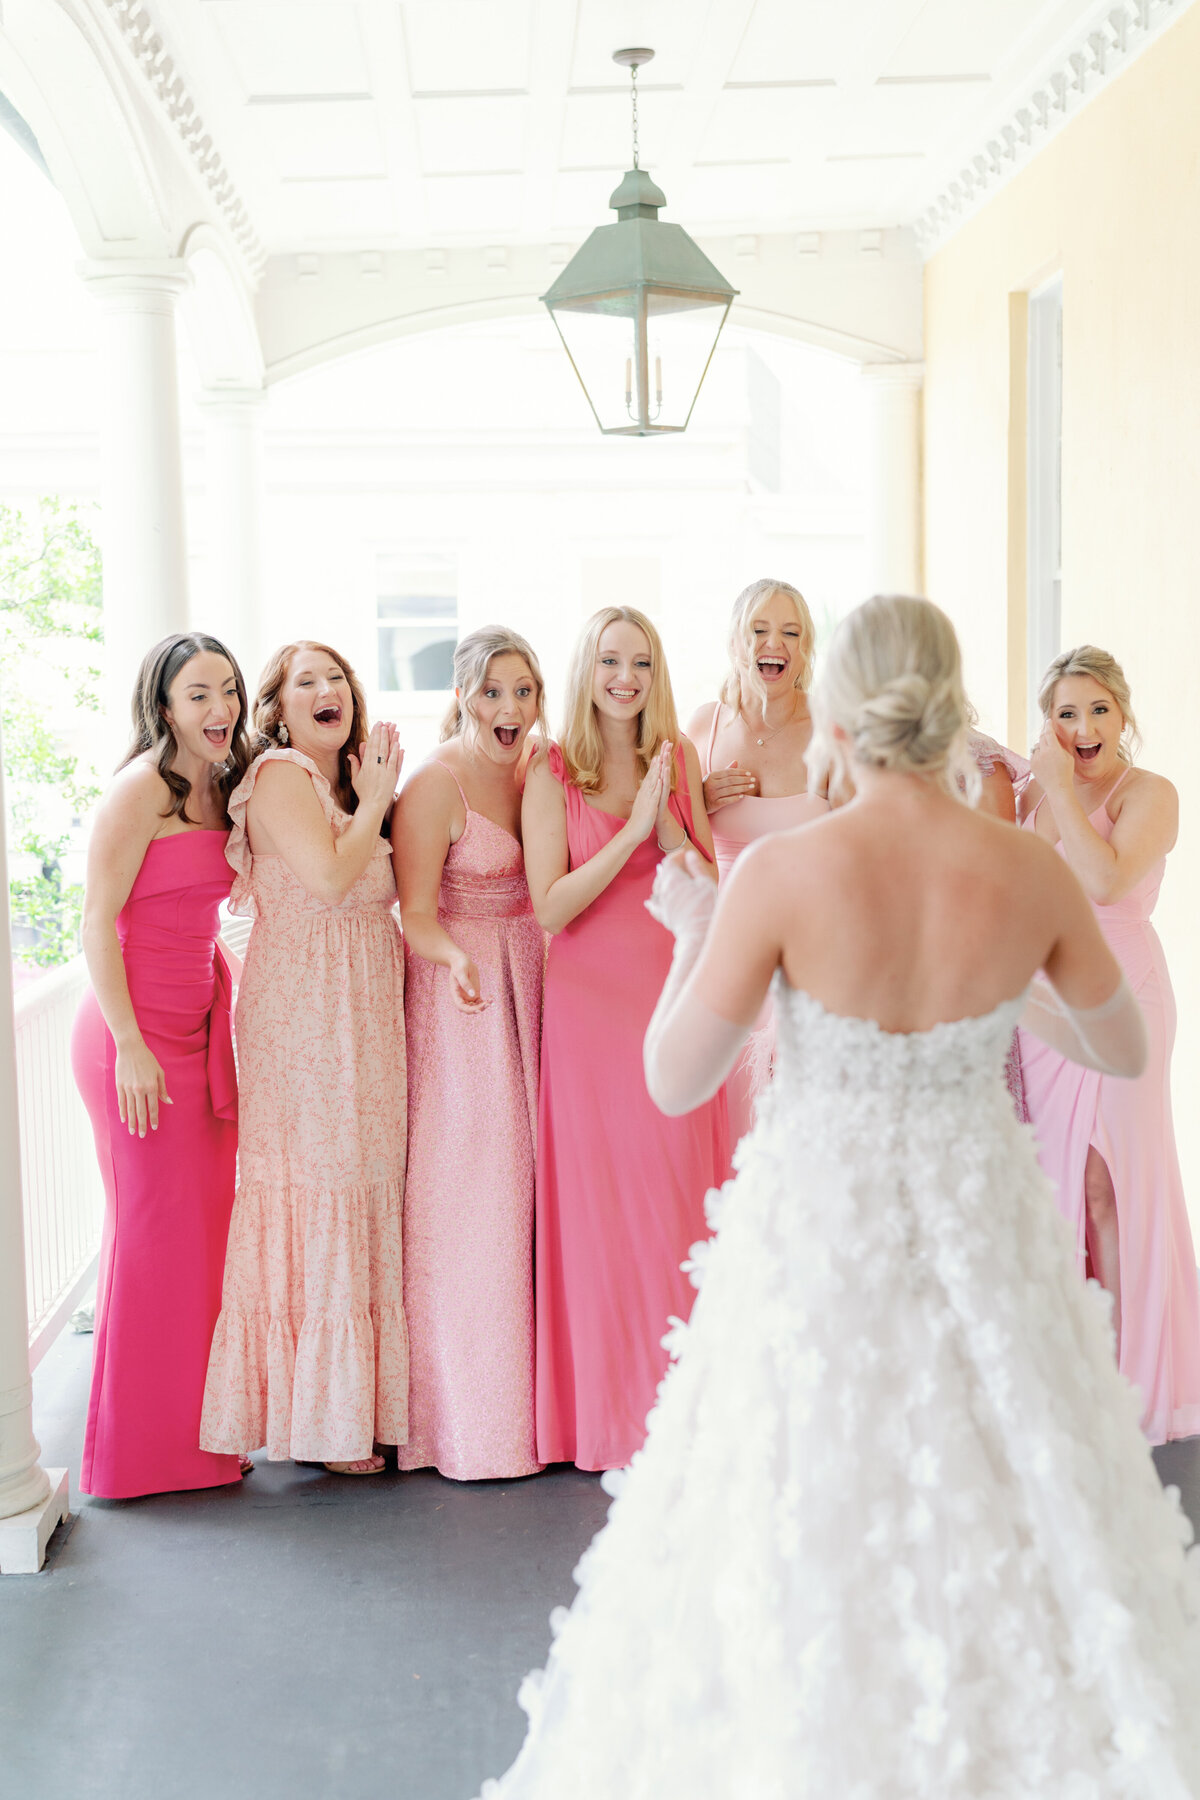 bride_bridesmaid_first_look_pink_dresses_william_aiken_house_outdoor_wedding_kailee_dimeglio_photography-247